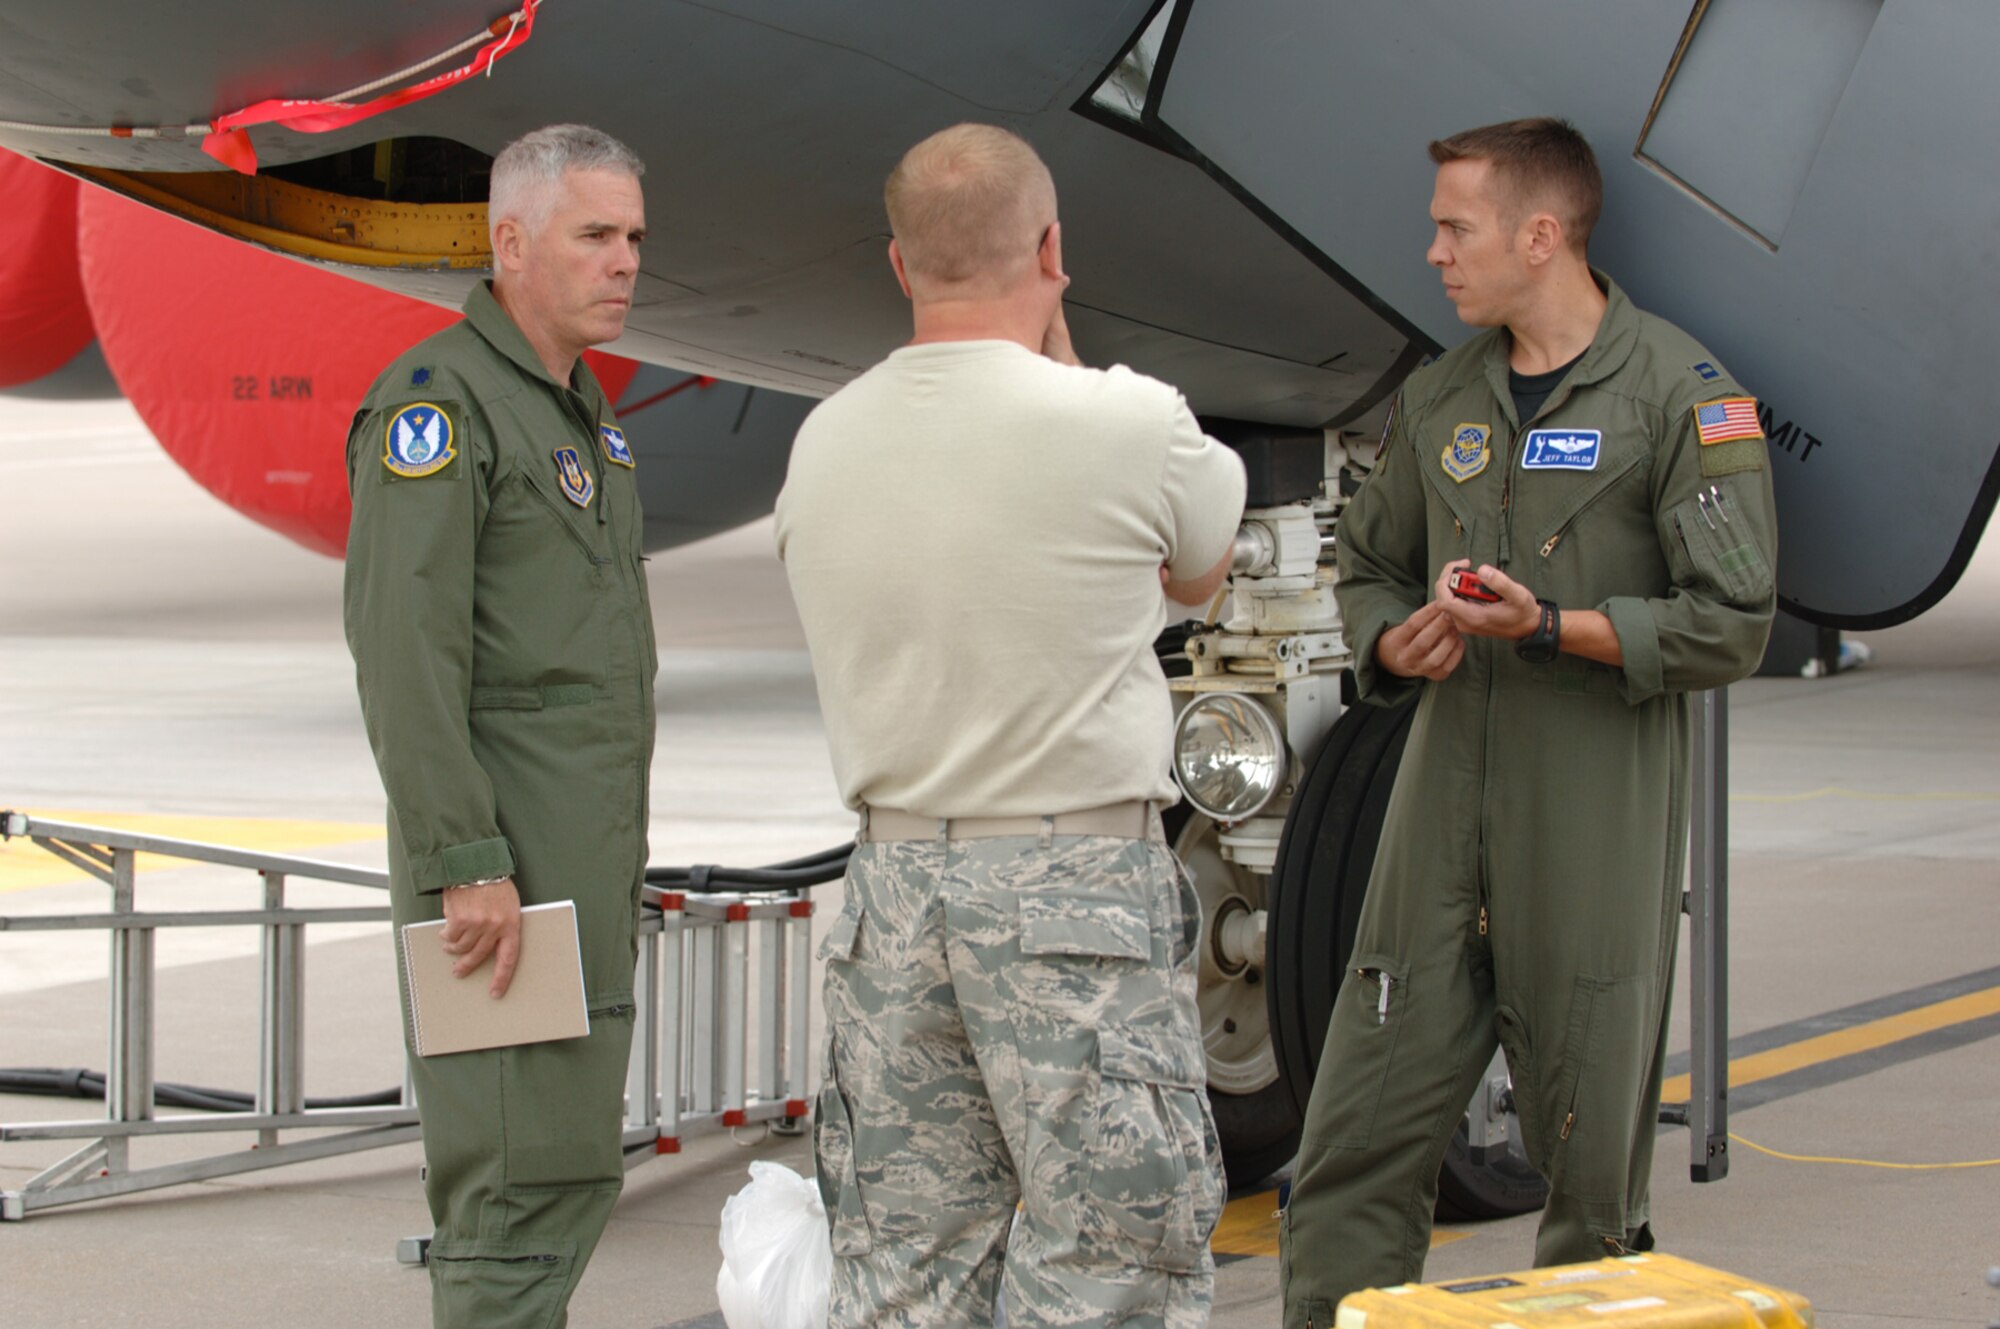 Lt. Col. John Wood (on left) talks Friday with Master Sgt. Al Ryder and Capt. Jeff Taylor on the flightline of McConnell Air Force Base, Kan. The three are part of team scheduled to compete at Air Mobility Command Rodeo 2009, a world-wide readiness competition at McChord AFB, Wash., from July 19 to July 25. Colonel Wood is a Reserve KC-135 Stratotanker pilot assigned to the 18th Air Refueling Squadron, the flying unit of the 931st Air Refueling Group at McConnell. Sergeant Ryder, also a 931st Reservist, is leading the KC-135 maintenance team headed to the Rodeo. Captain Taylor is assigned to the 22nd Air Refueling Wing, the 931st's active-duty host unit at McConnell. (U.S. Air Force photo/Tech. Sgt. Jason Schaap)
